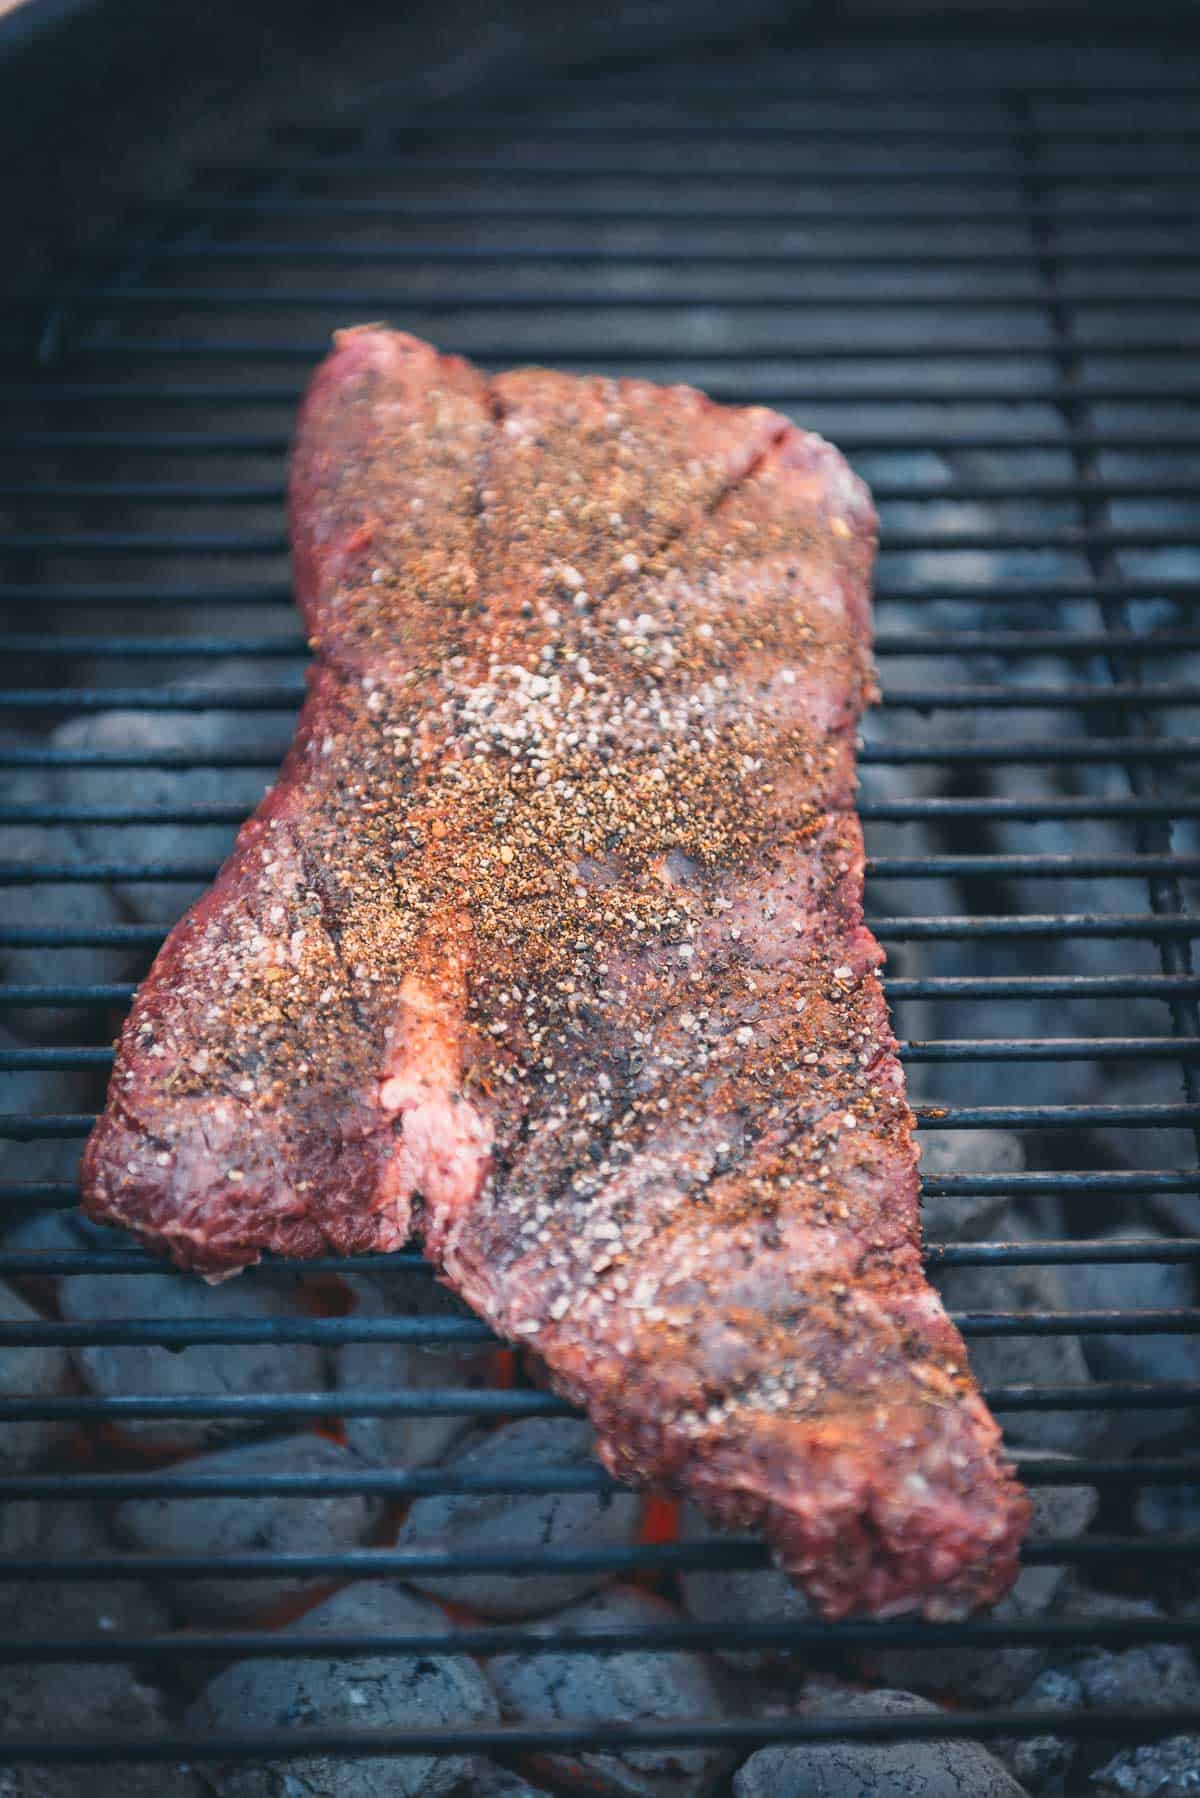 A piece of steak is being cooked on a grill.